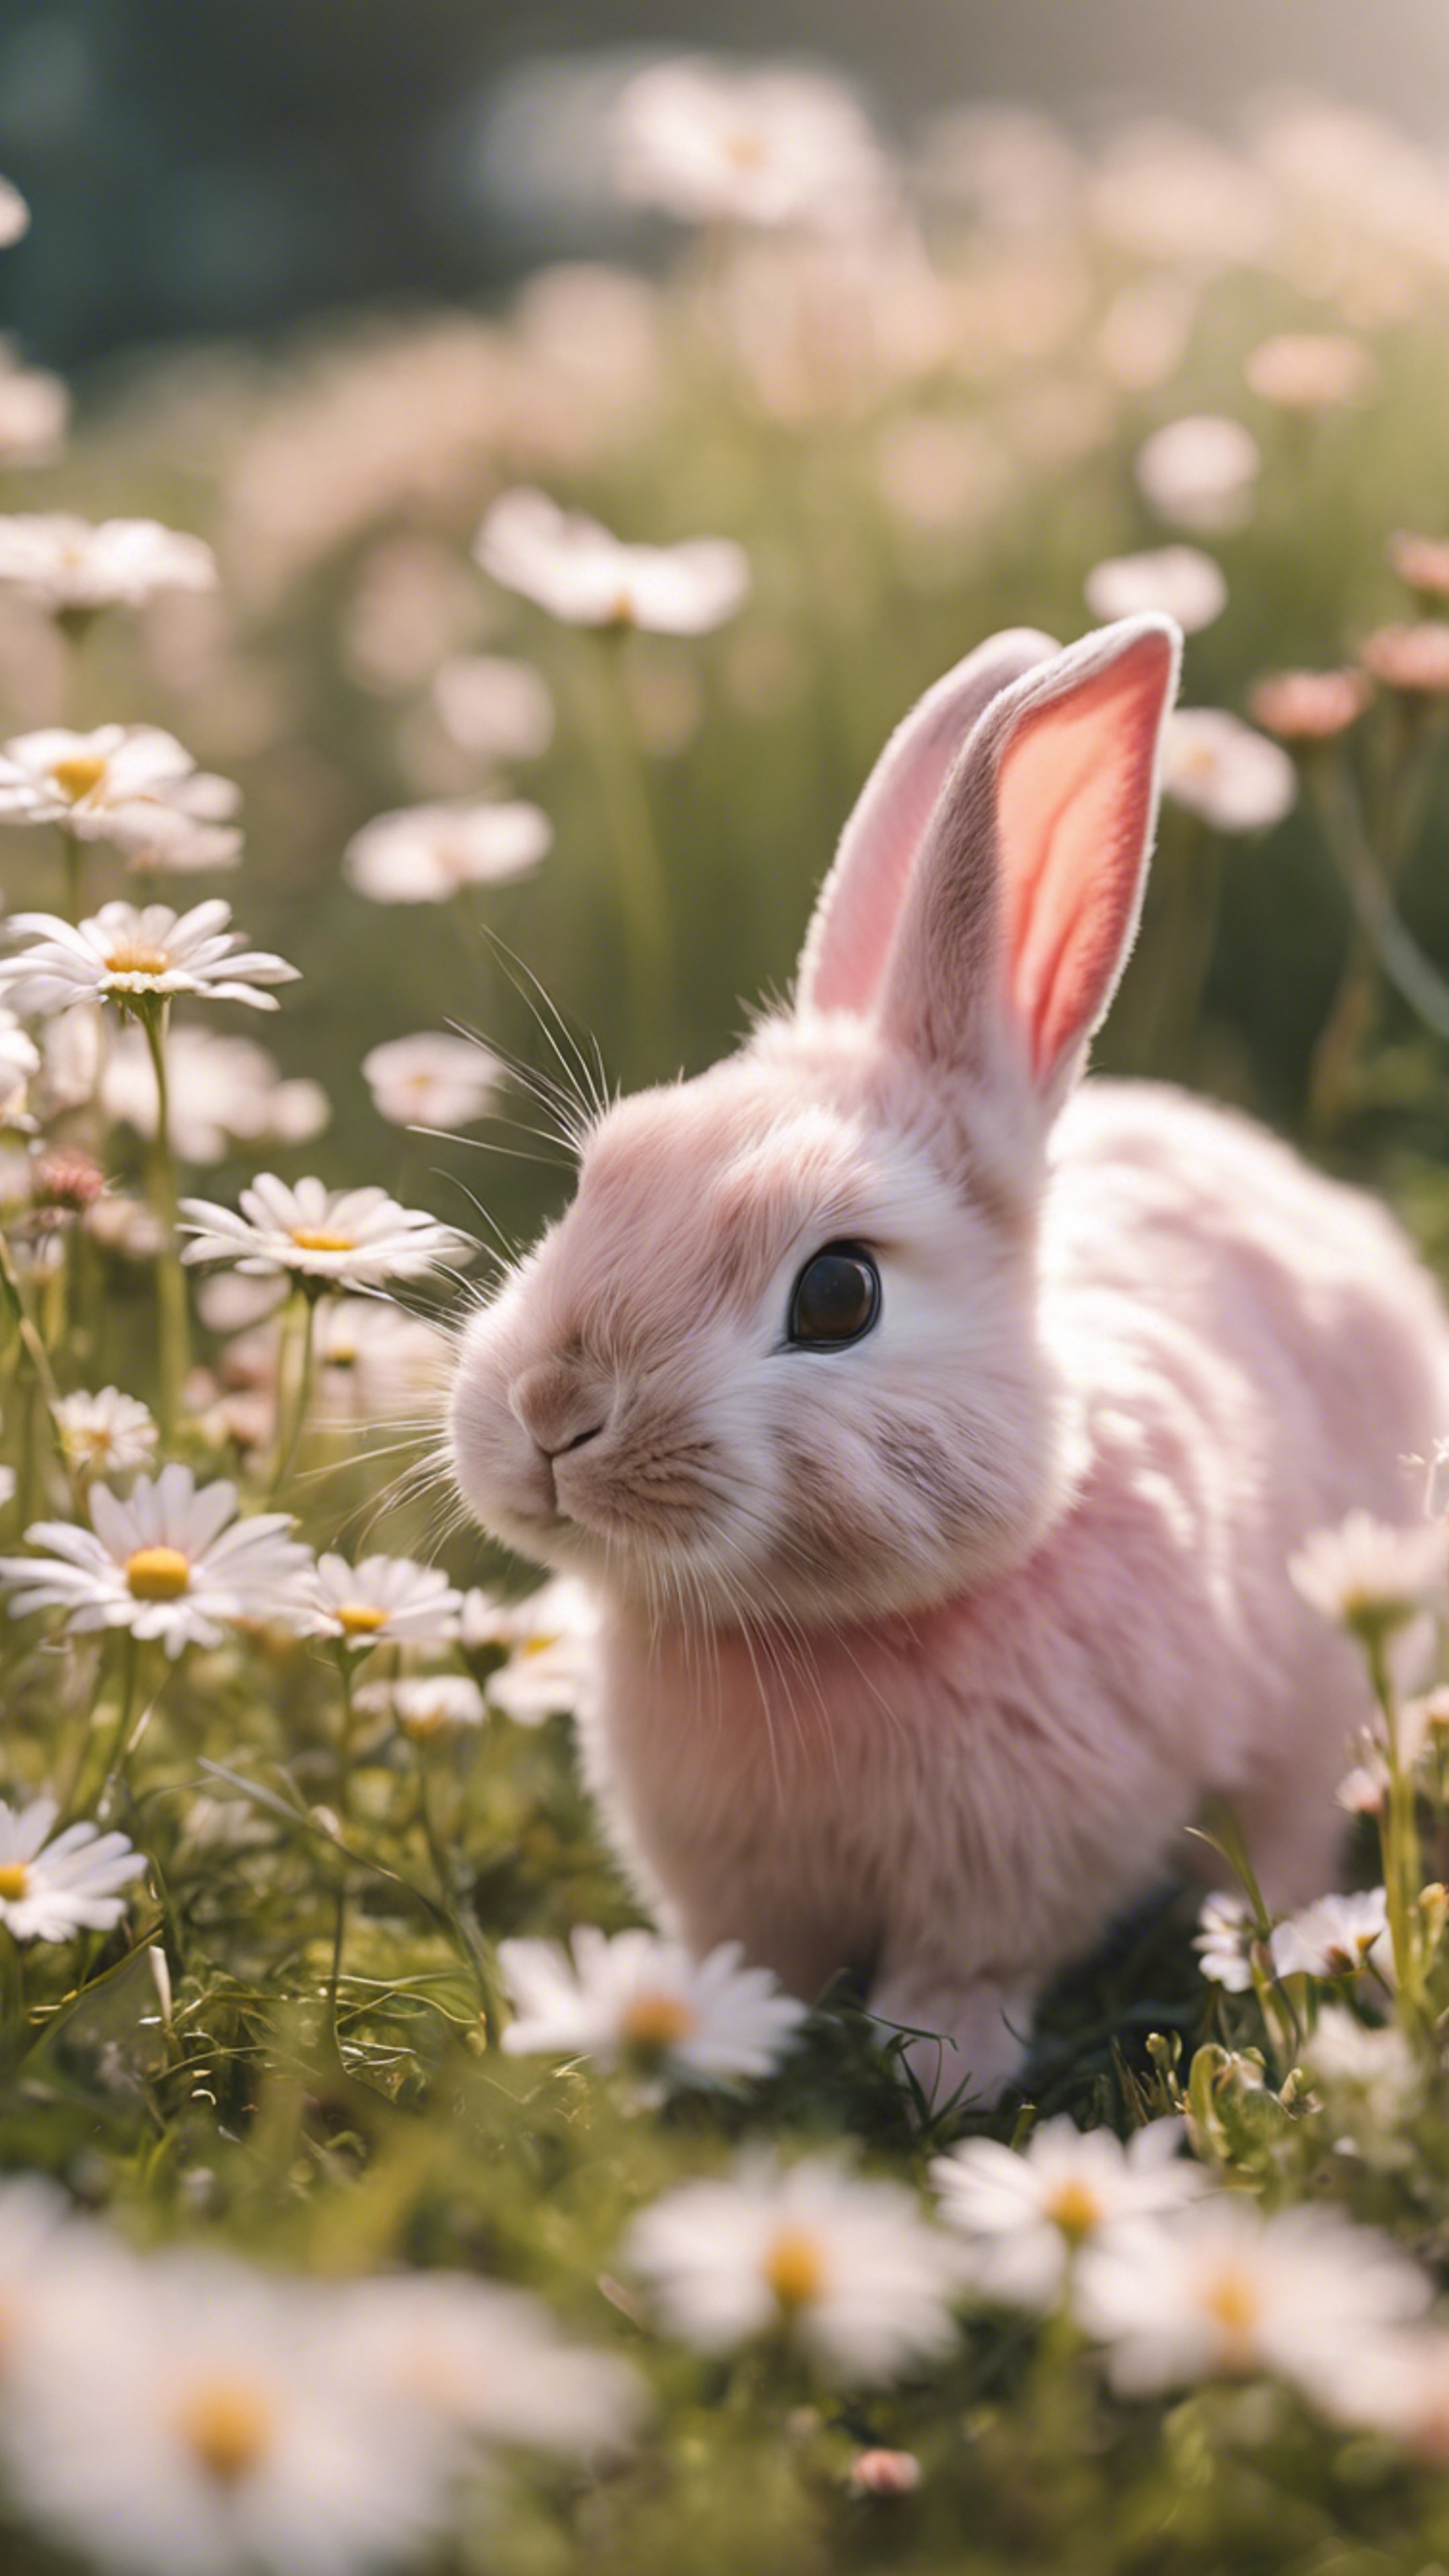 A pack of blush pink, Kawaii style rabbits happily playing in a field of daisies. Tapet[cf36497c89454393a51d]